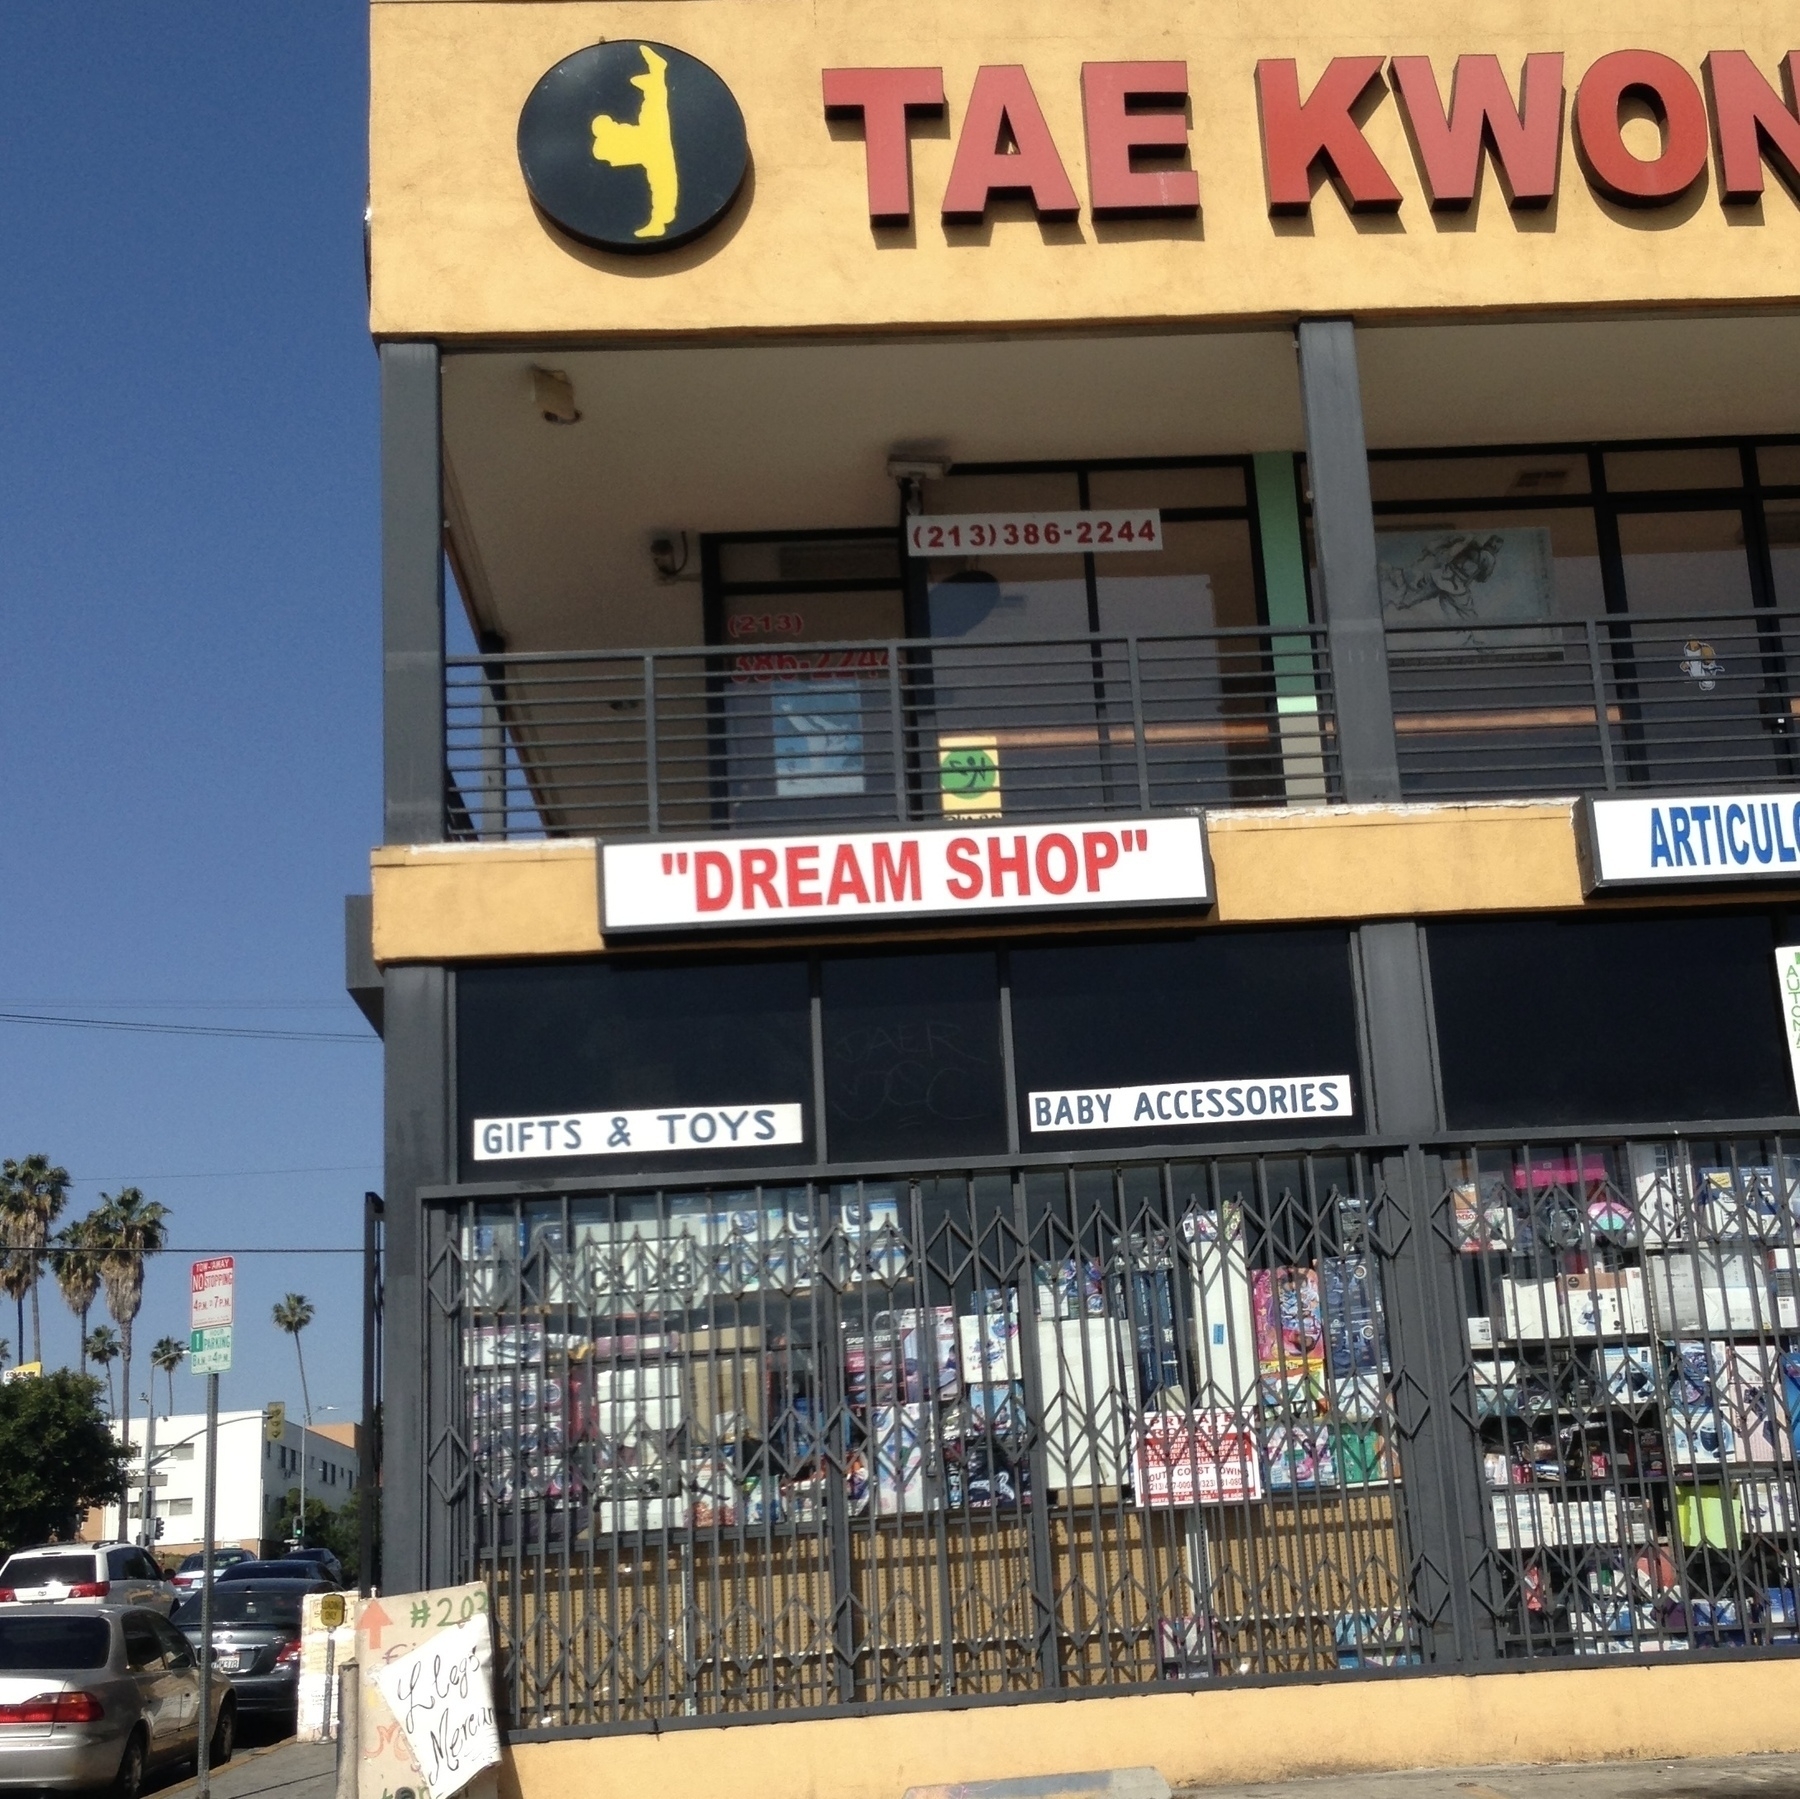 A typical Los Angeles two story retail plaza with a store called DREAM SHOP in red capital letters and in quotes.